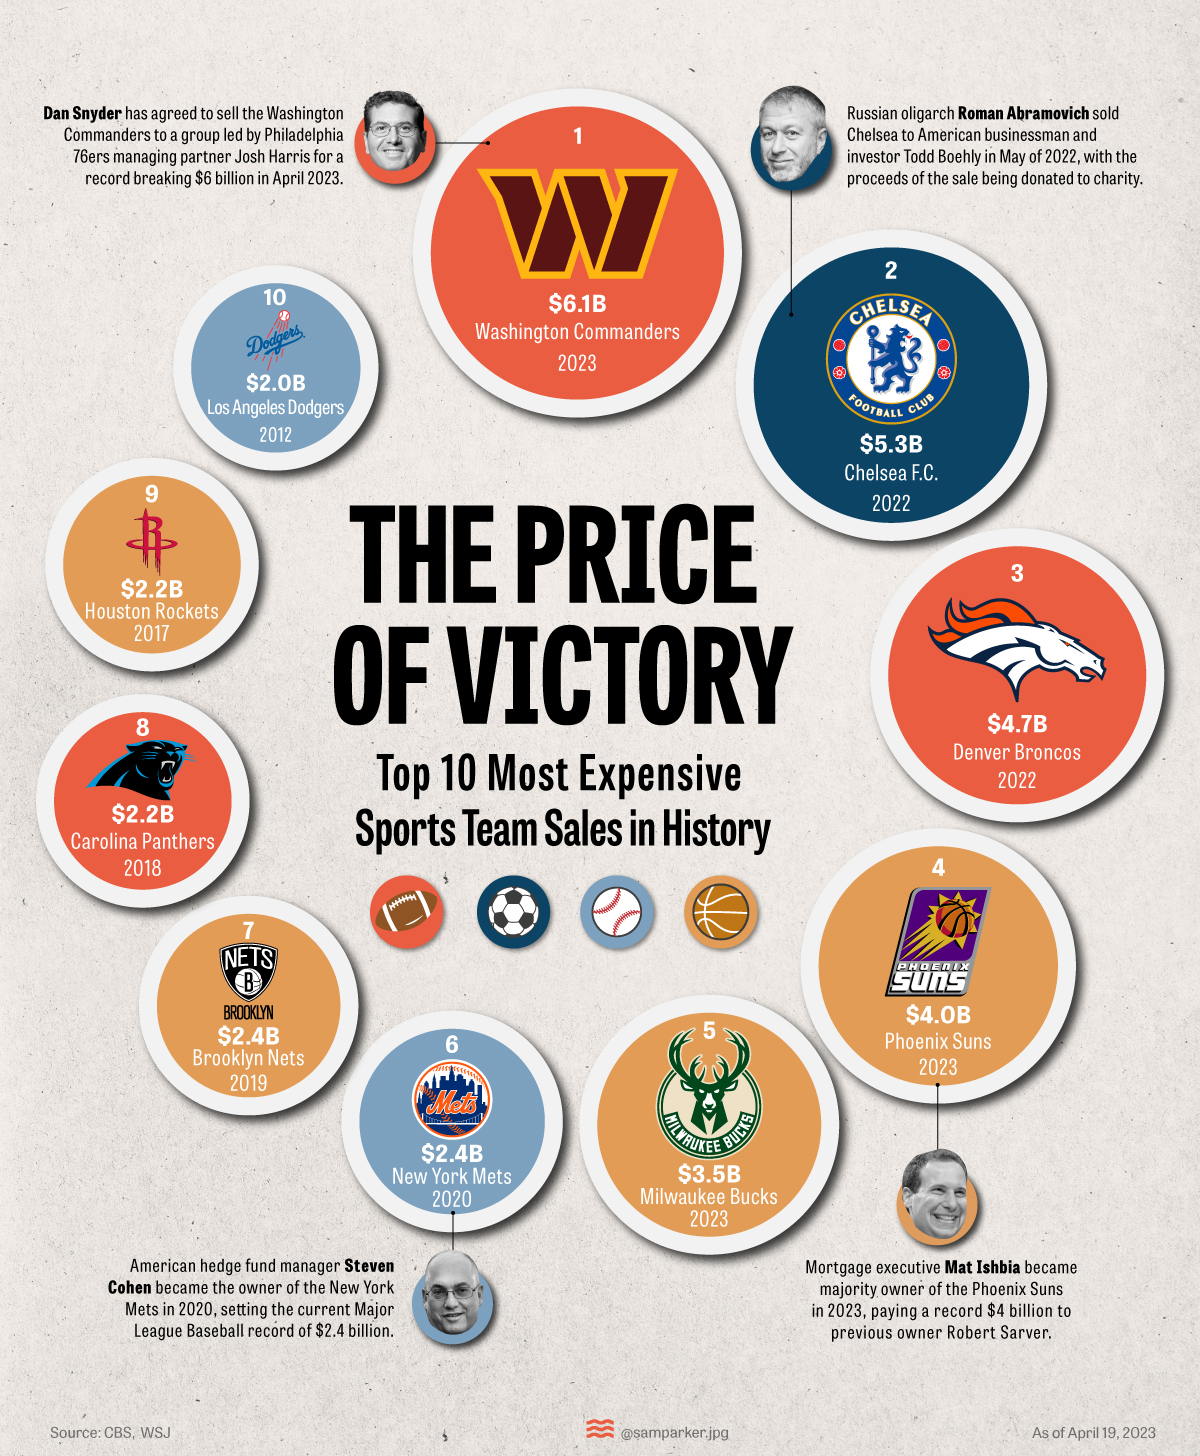 The ten most expensive professional sports team sales shown as sized bubbles. The Washington Commanders sale is number one at $6.1 billion.